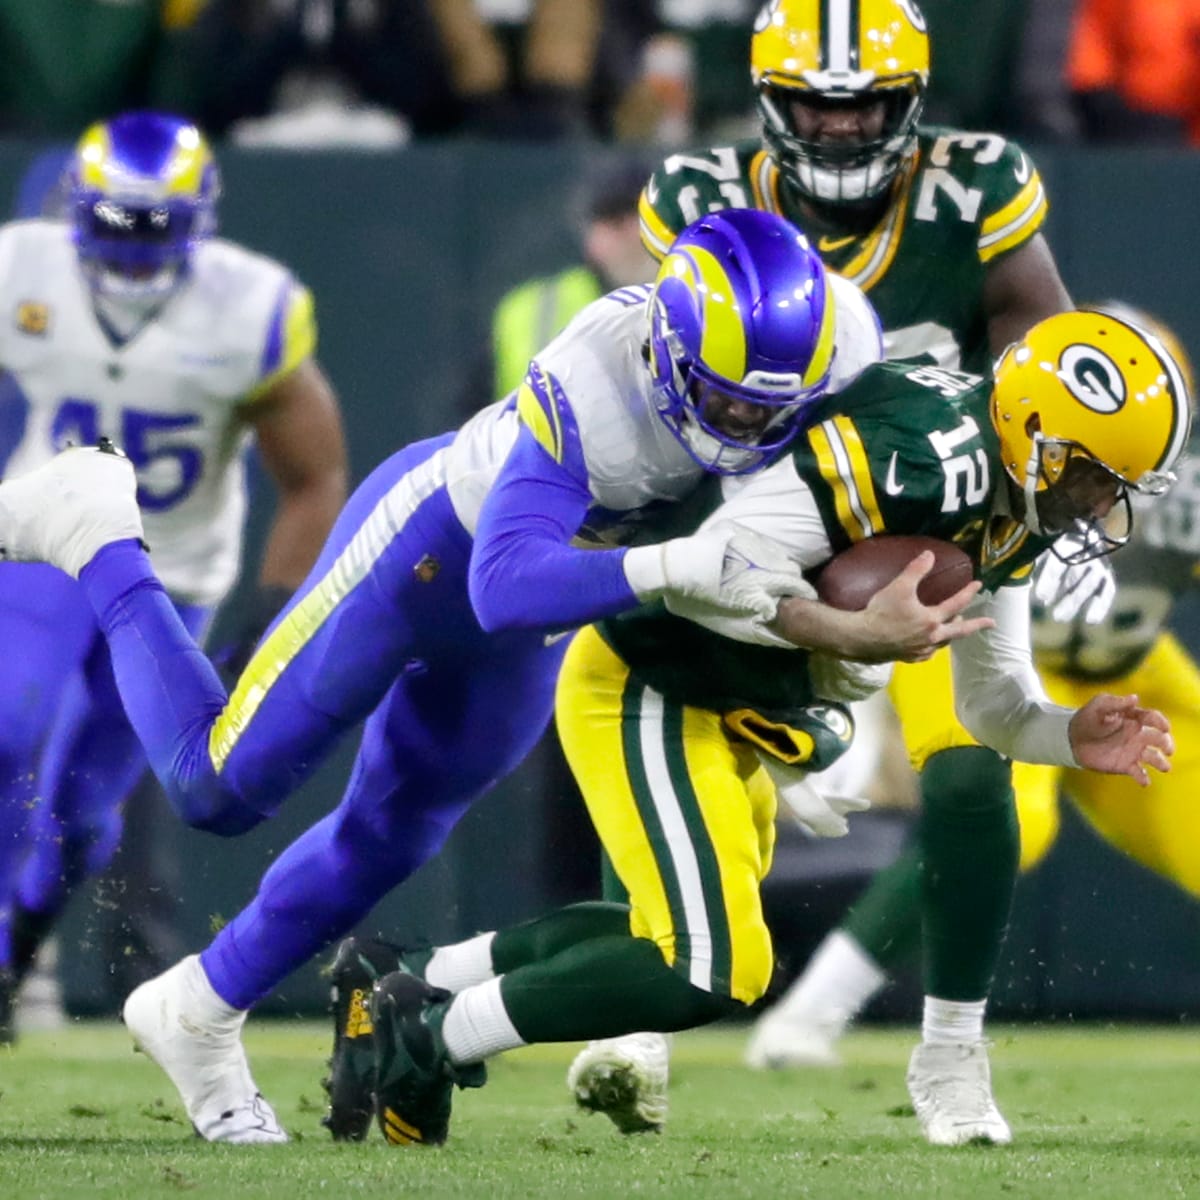 Los Angeles Rams vs. Green Bay Packers: Live In-Game Updates